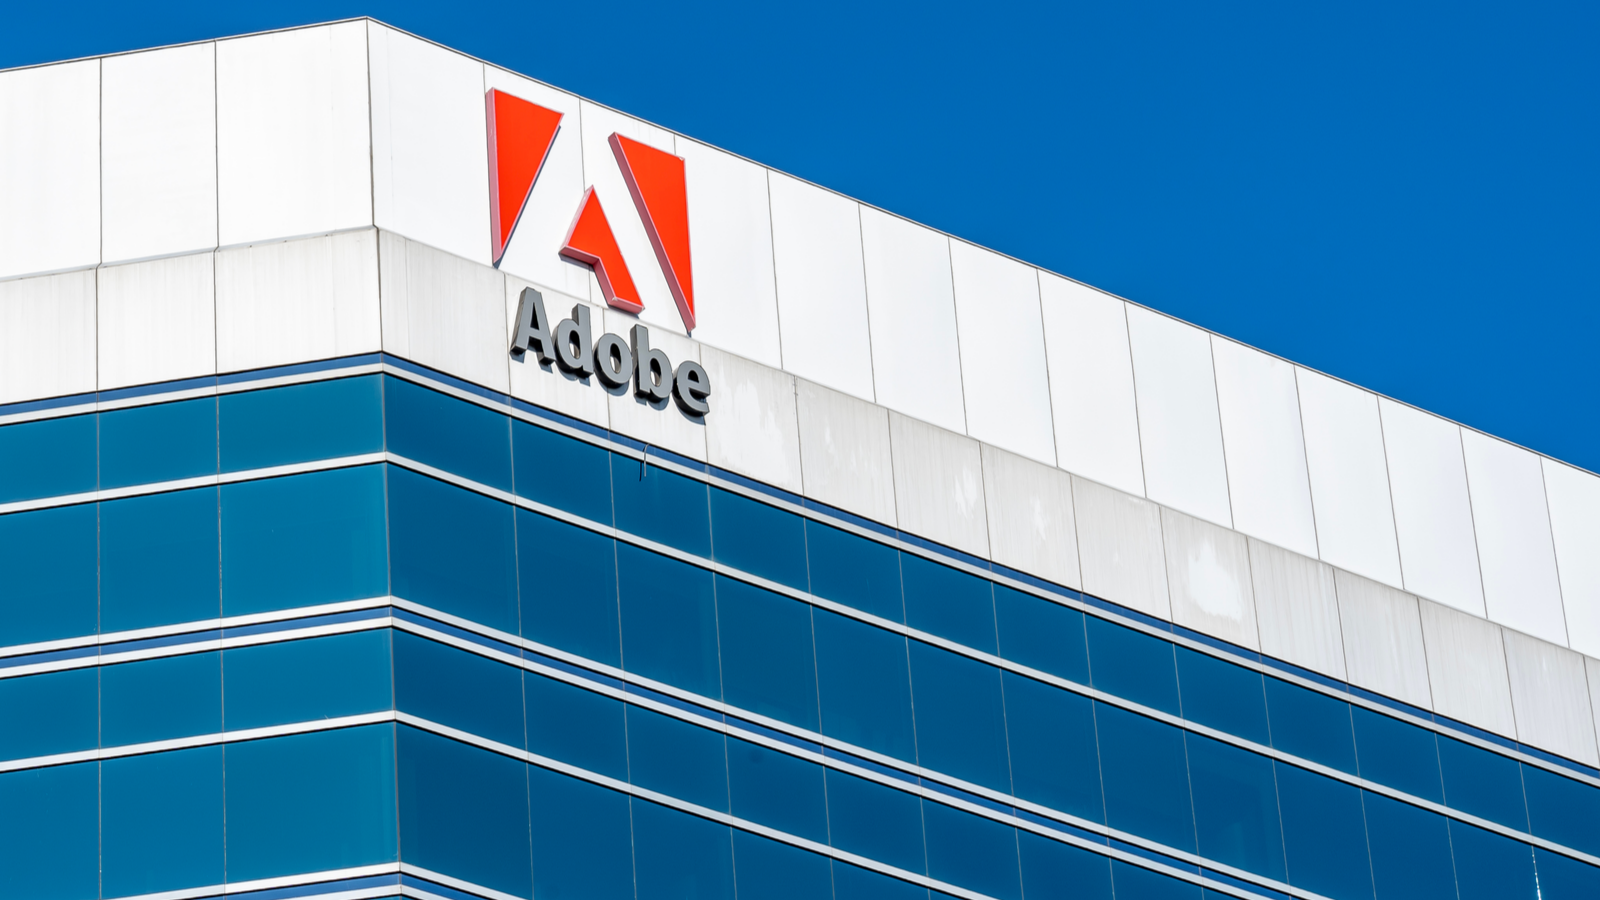 ADBE Stock. A white and blue building with the Adobe logo is pictured in front of a blue sky